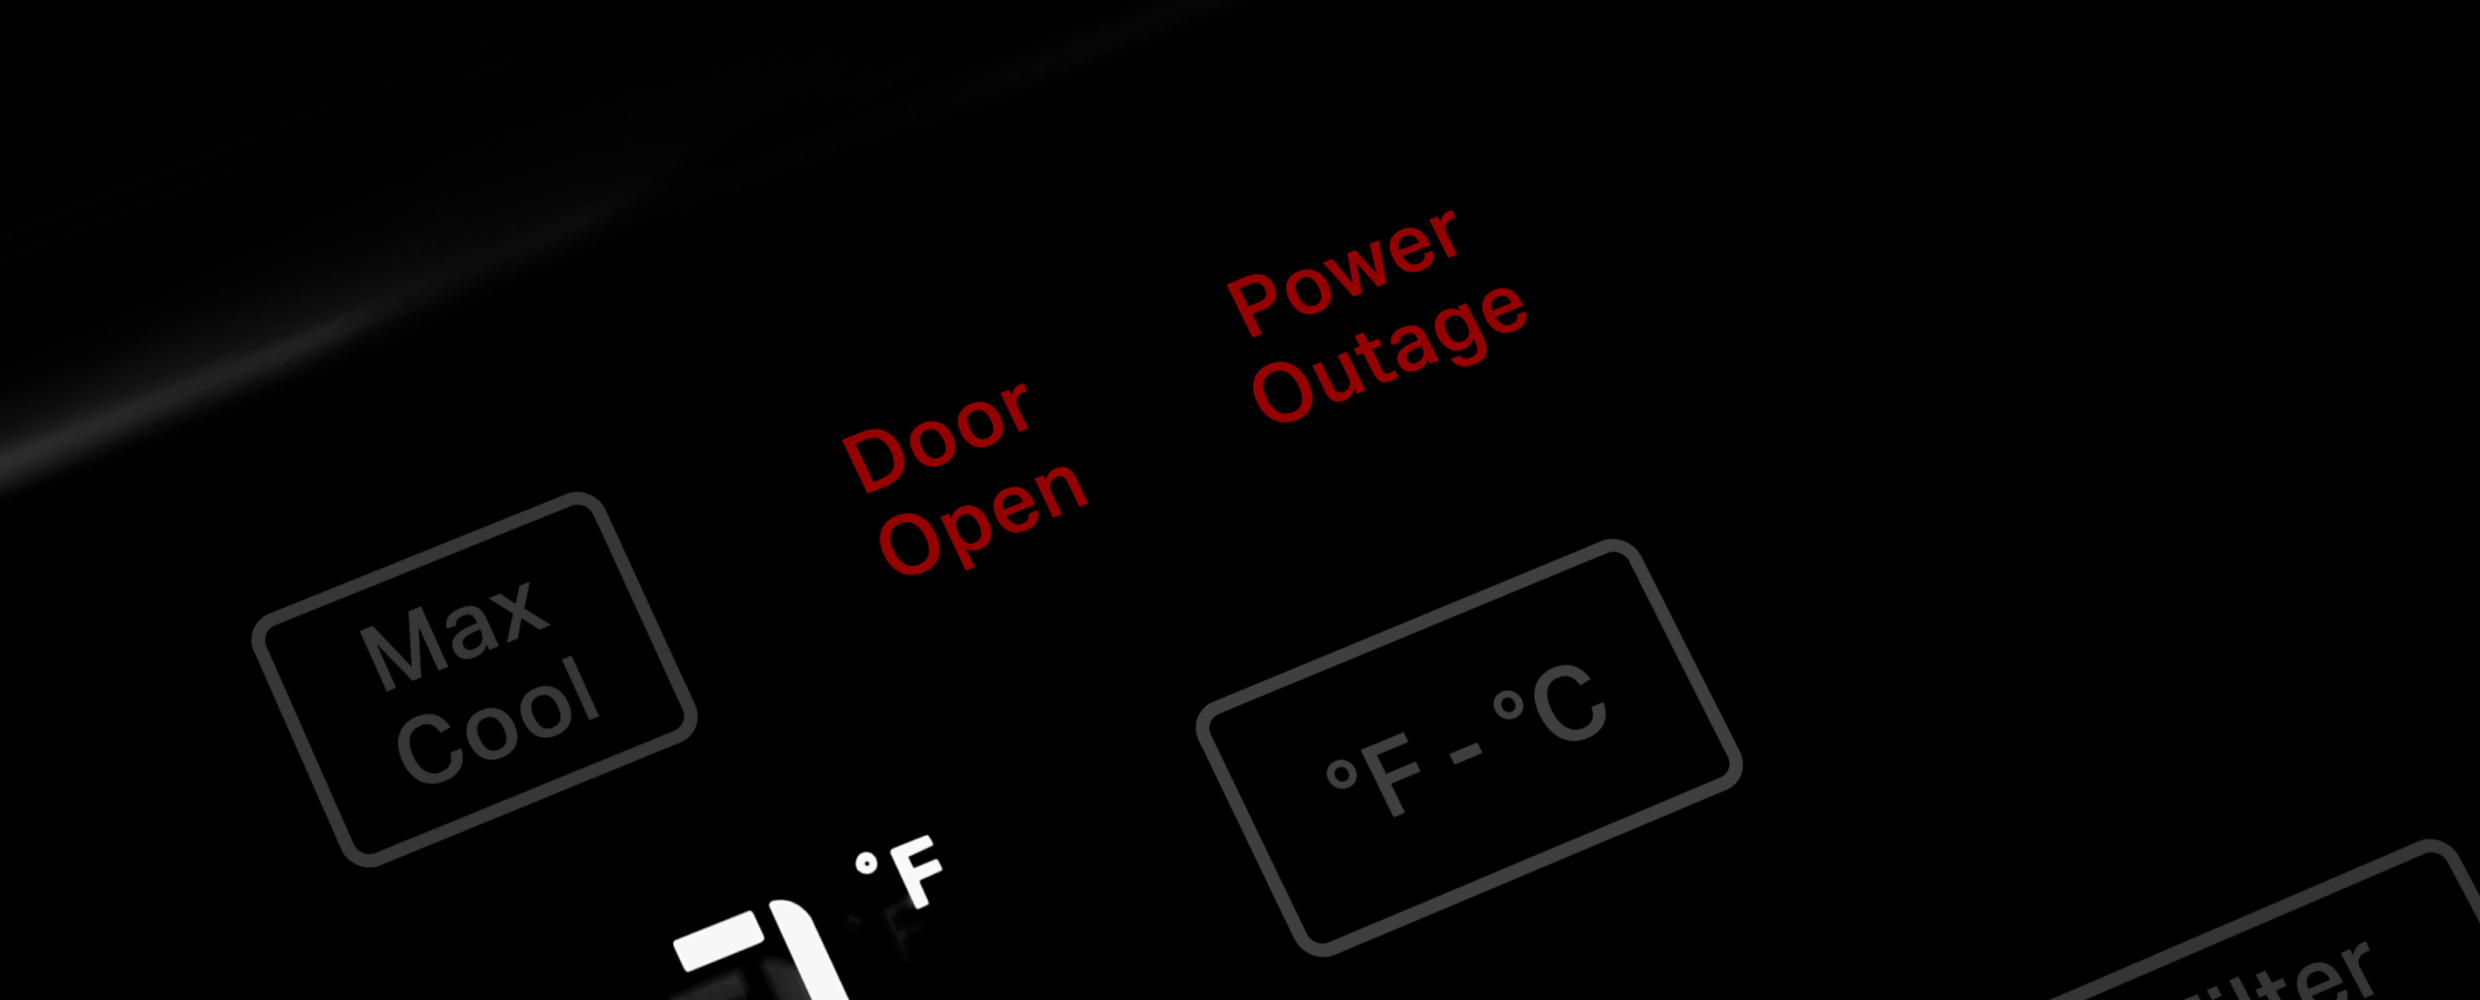 Door Open and Power Outage buttons on Internal Touchscreen Controls on the 48" KitchenAid® Built-In Side-by-Side Refrigerator